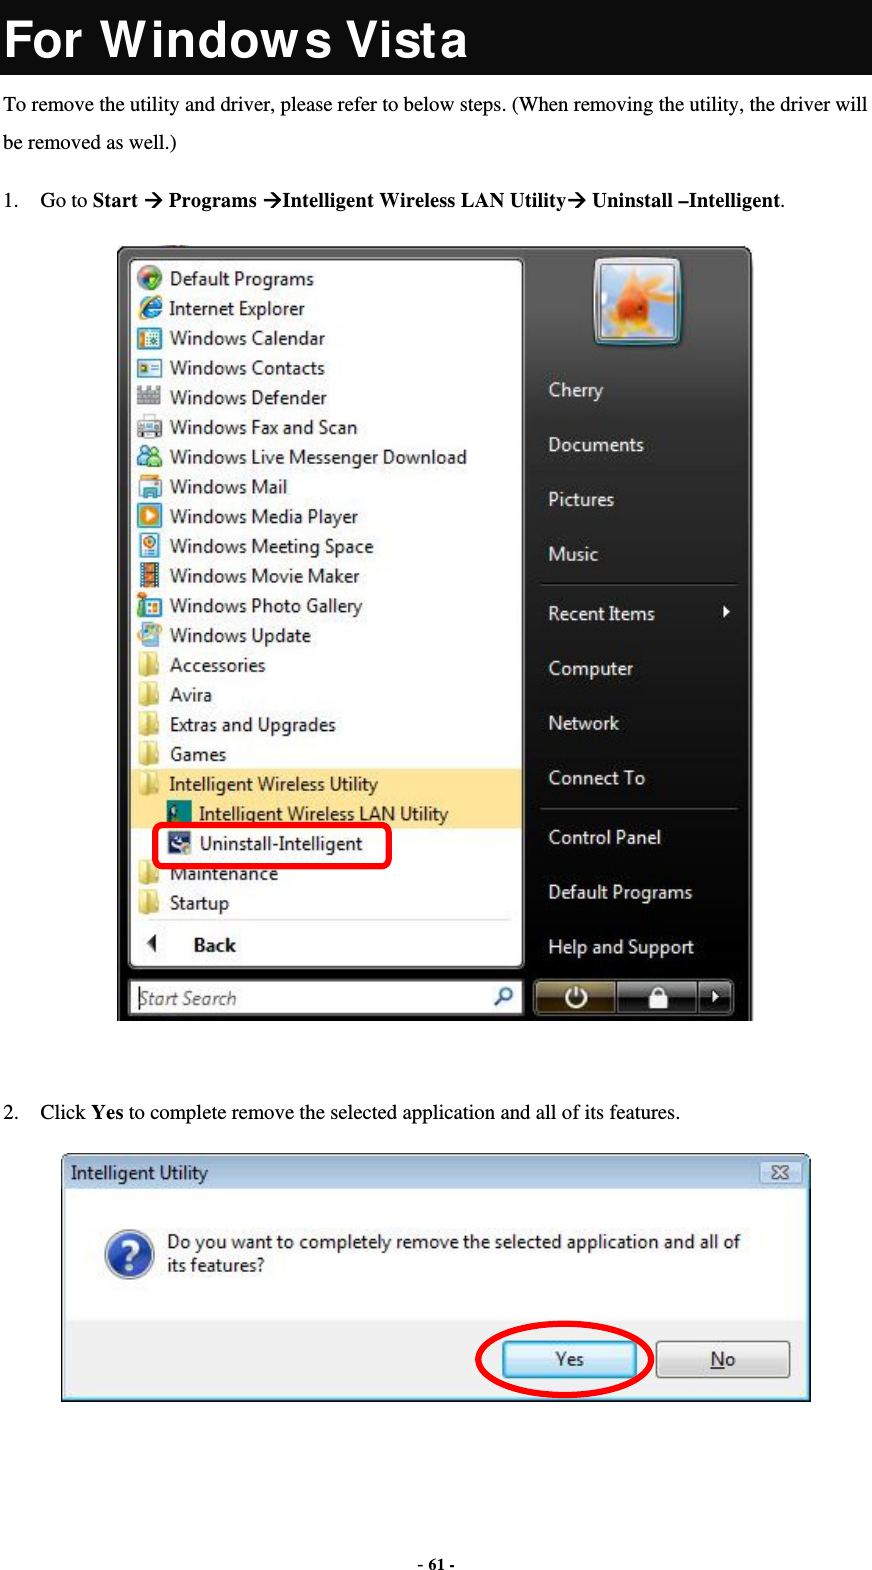  - 61 - For Windows Vista To remove the utility and driver, please refer to below steps. (When removing the utility, the driver will be removed as well.) 1. Go to Start  Programs Intelligent Wireless LAN Utility Uninstall –Intelligent.   2. Click Yes to complete remove the selected application and all of its features.   